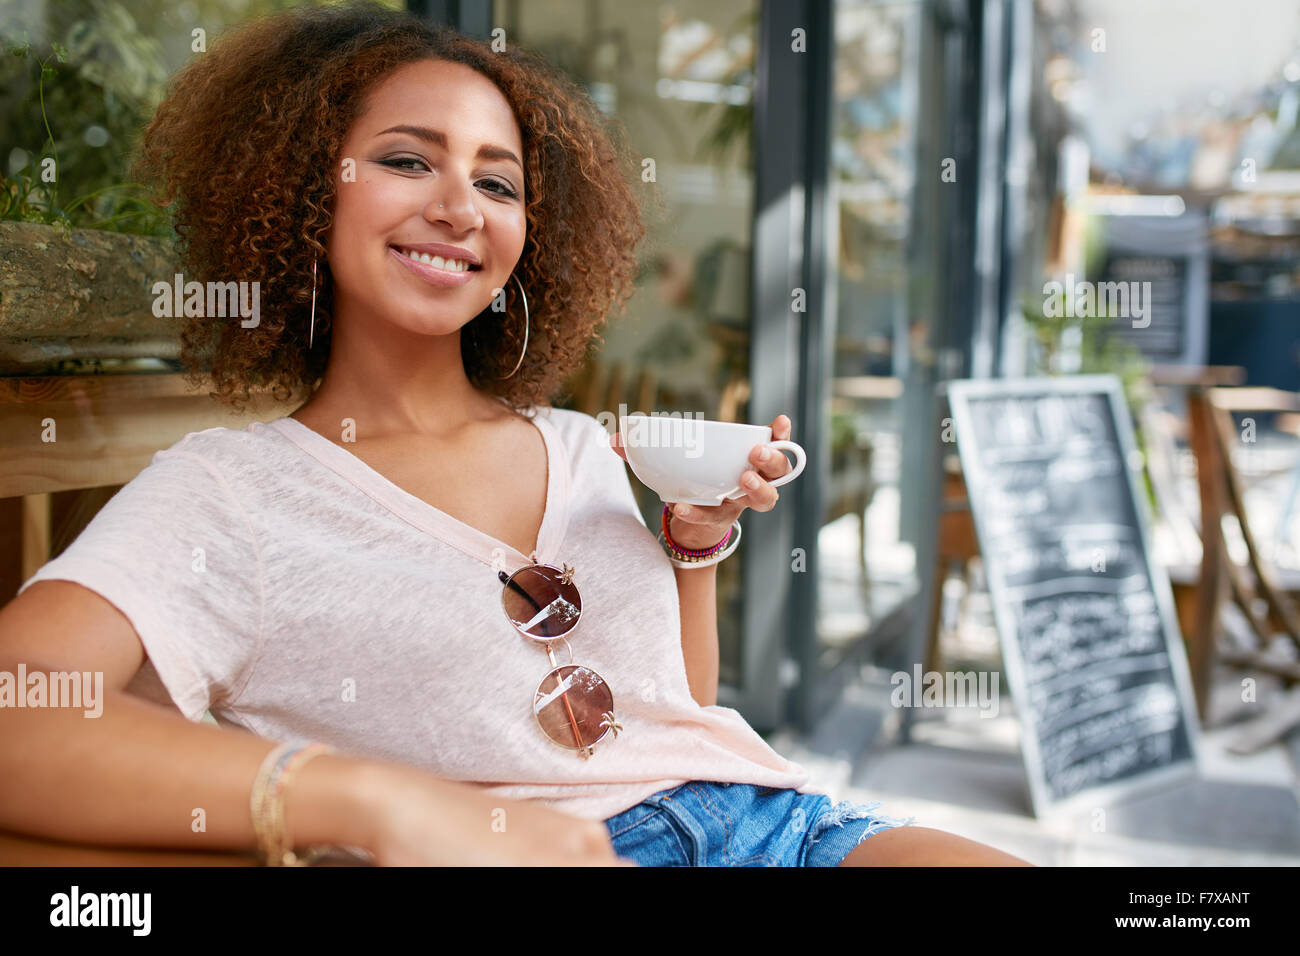 Portrait of young woman drinking coffee. African woman sitting at cafe holding a cup of coffee, looking at camera smiling. Stock Photo